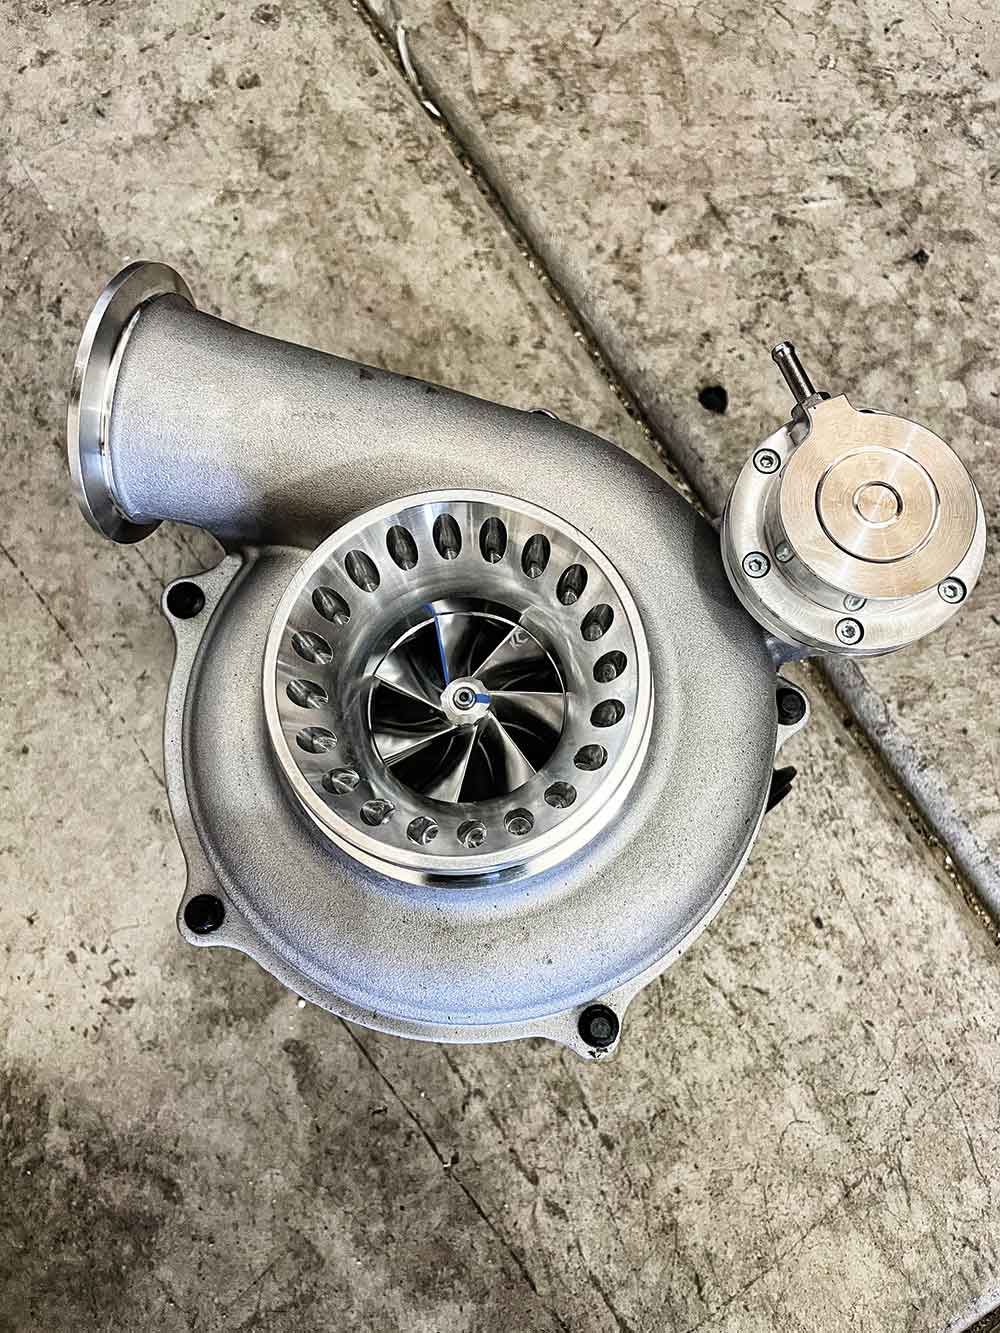 Stage One stock replacement KC300x turbocharger